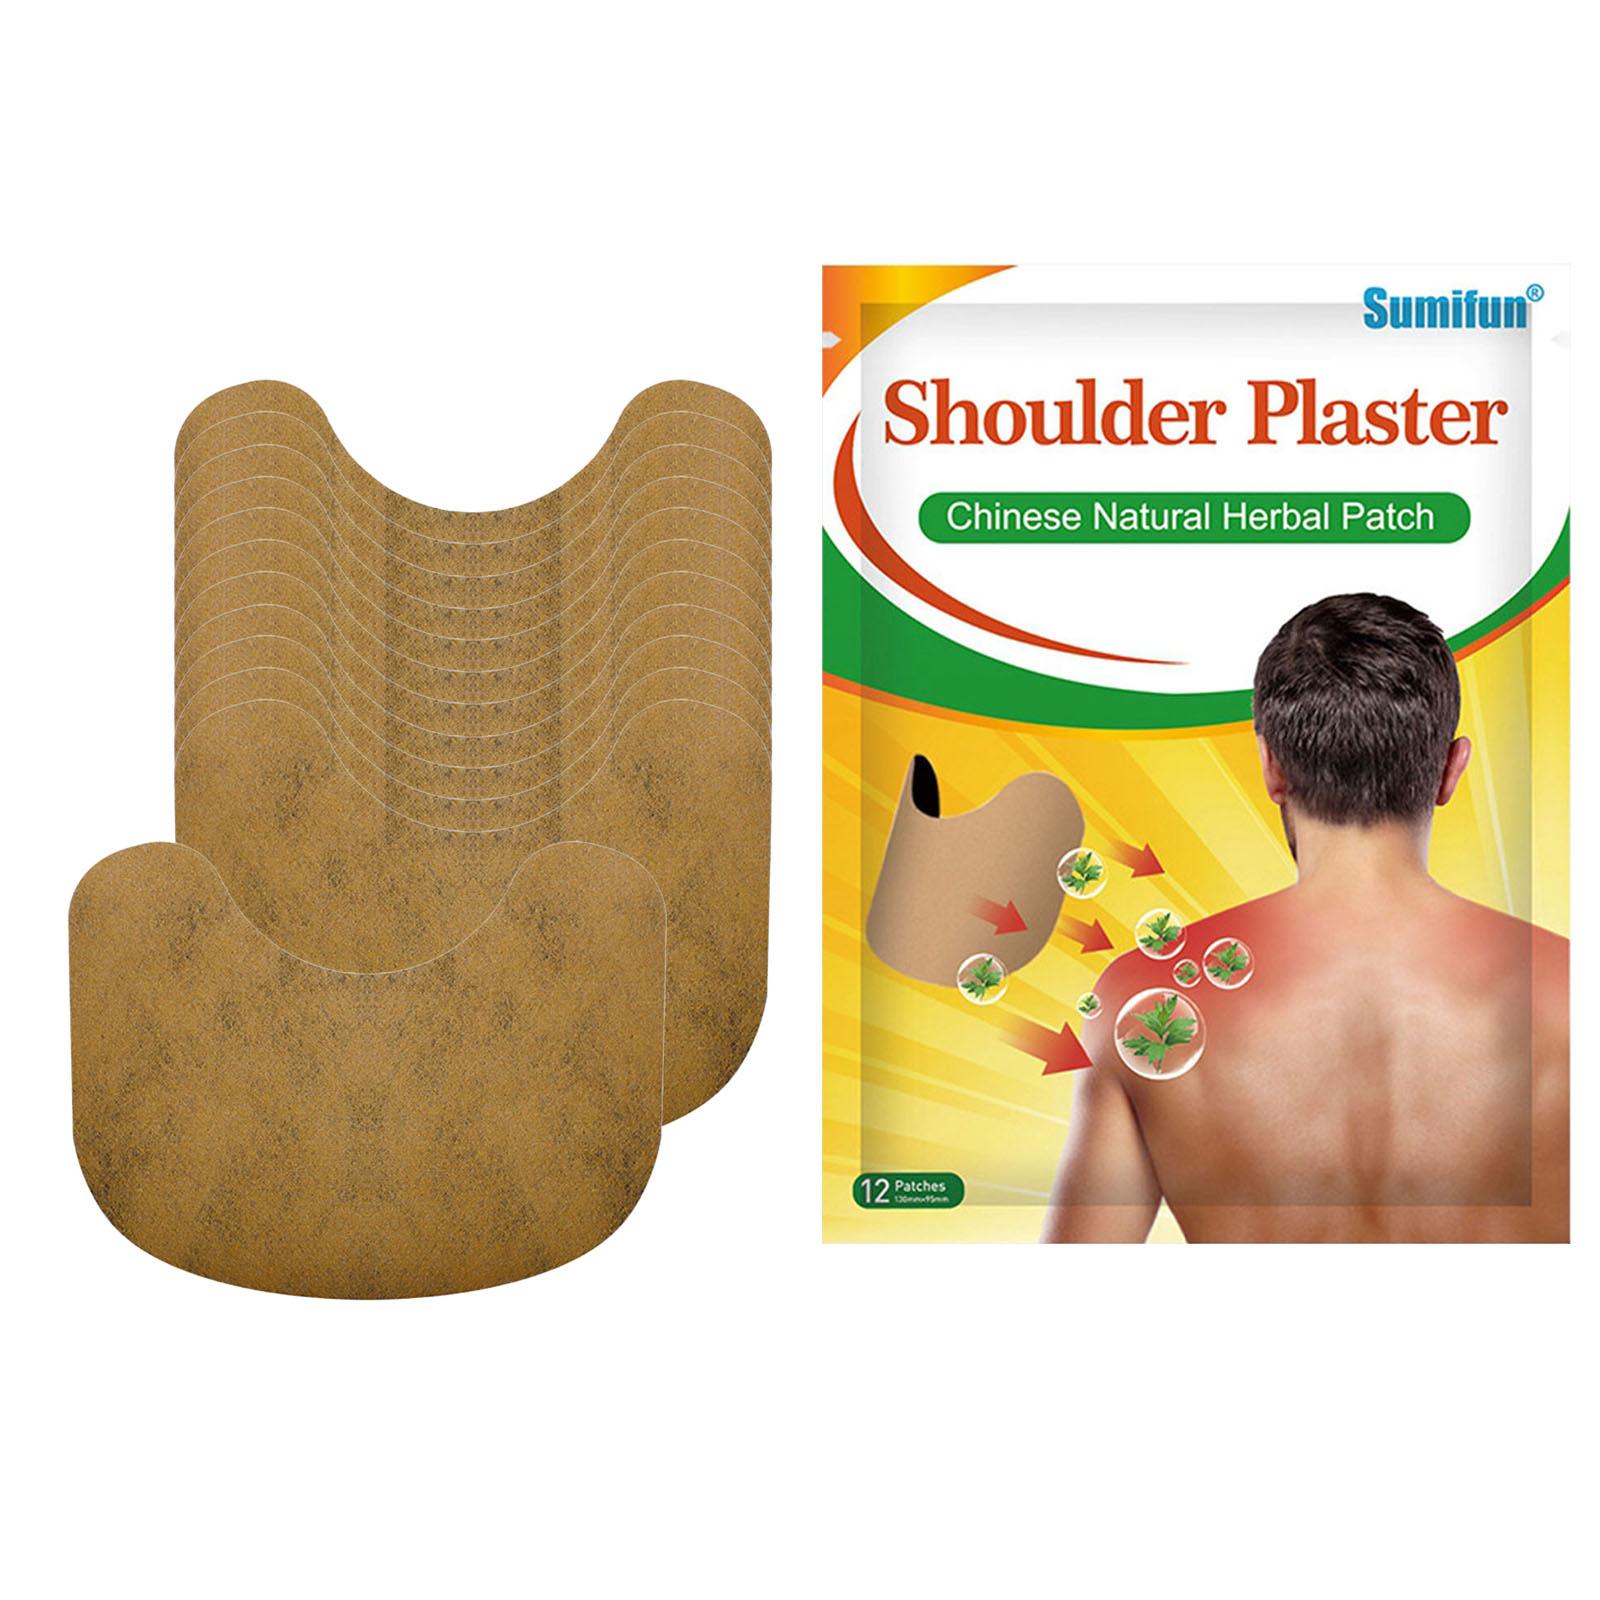 12 Pieces Natural Shoulder Patch Pain Plaster 5x3.9in for Joint/arthritis